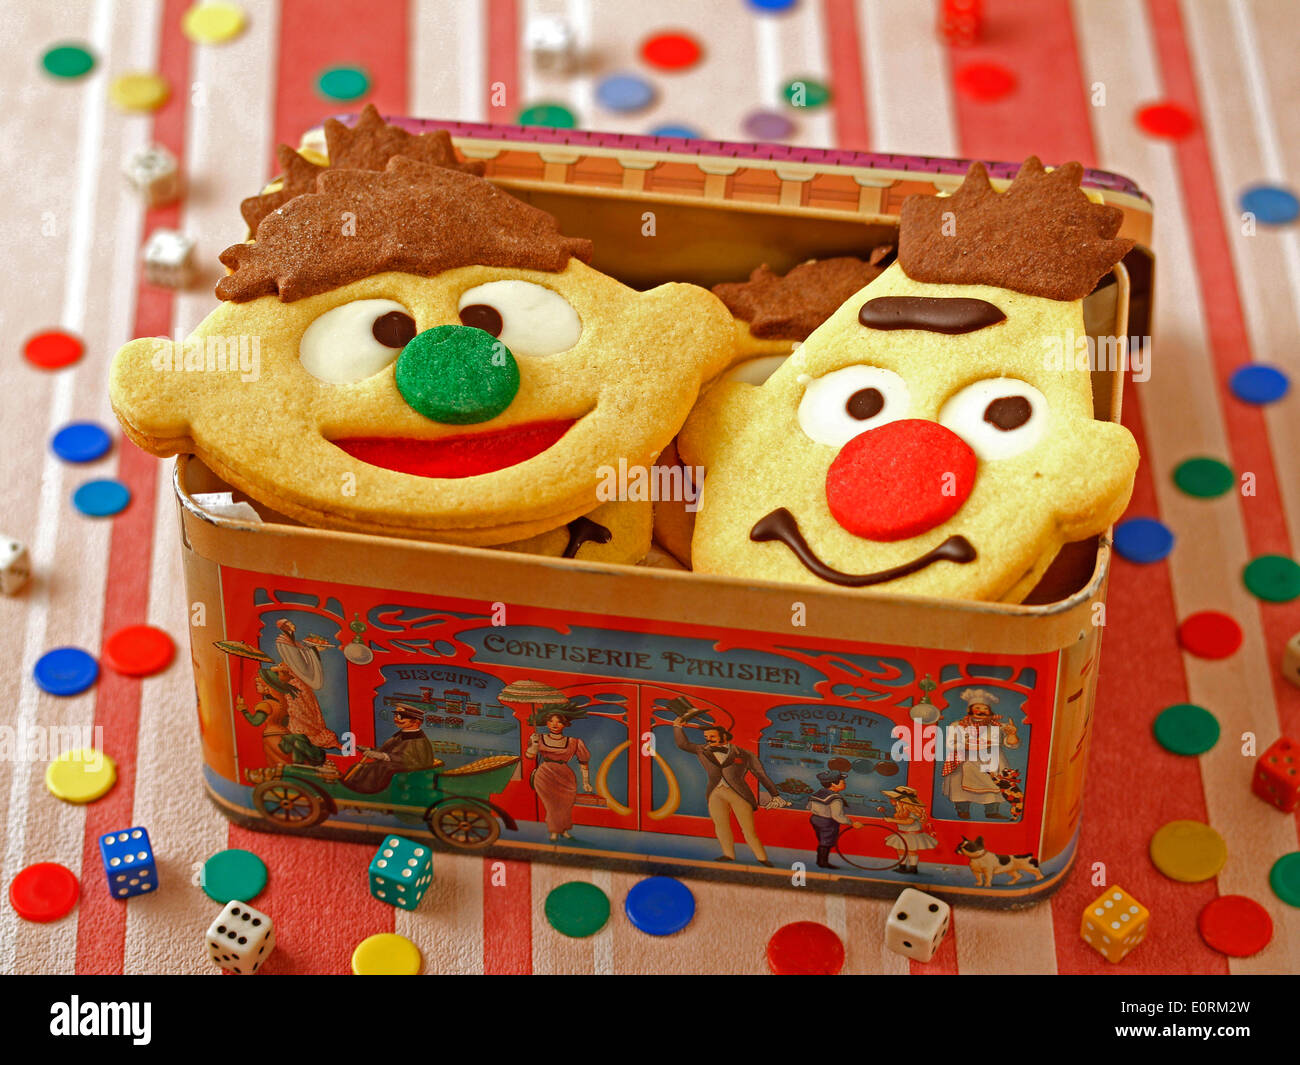 Ernie and Bert cookies. Recipe available. Stock Photo